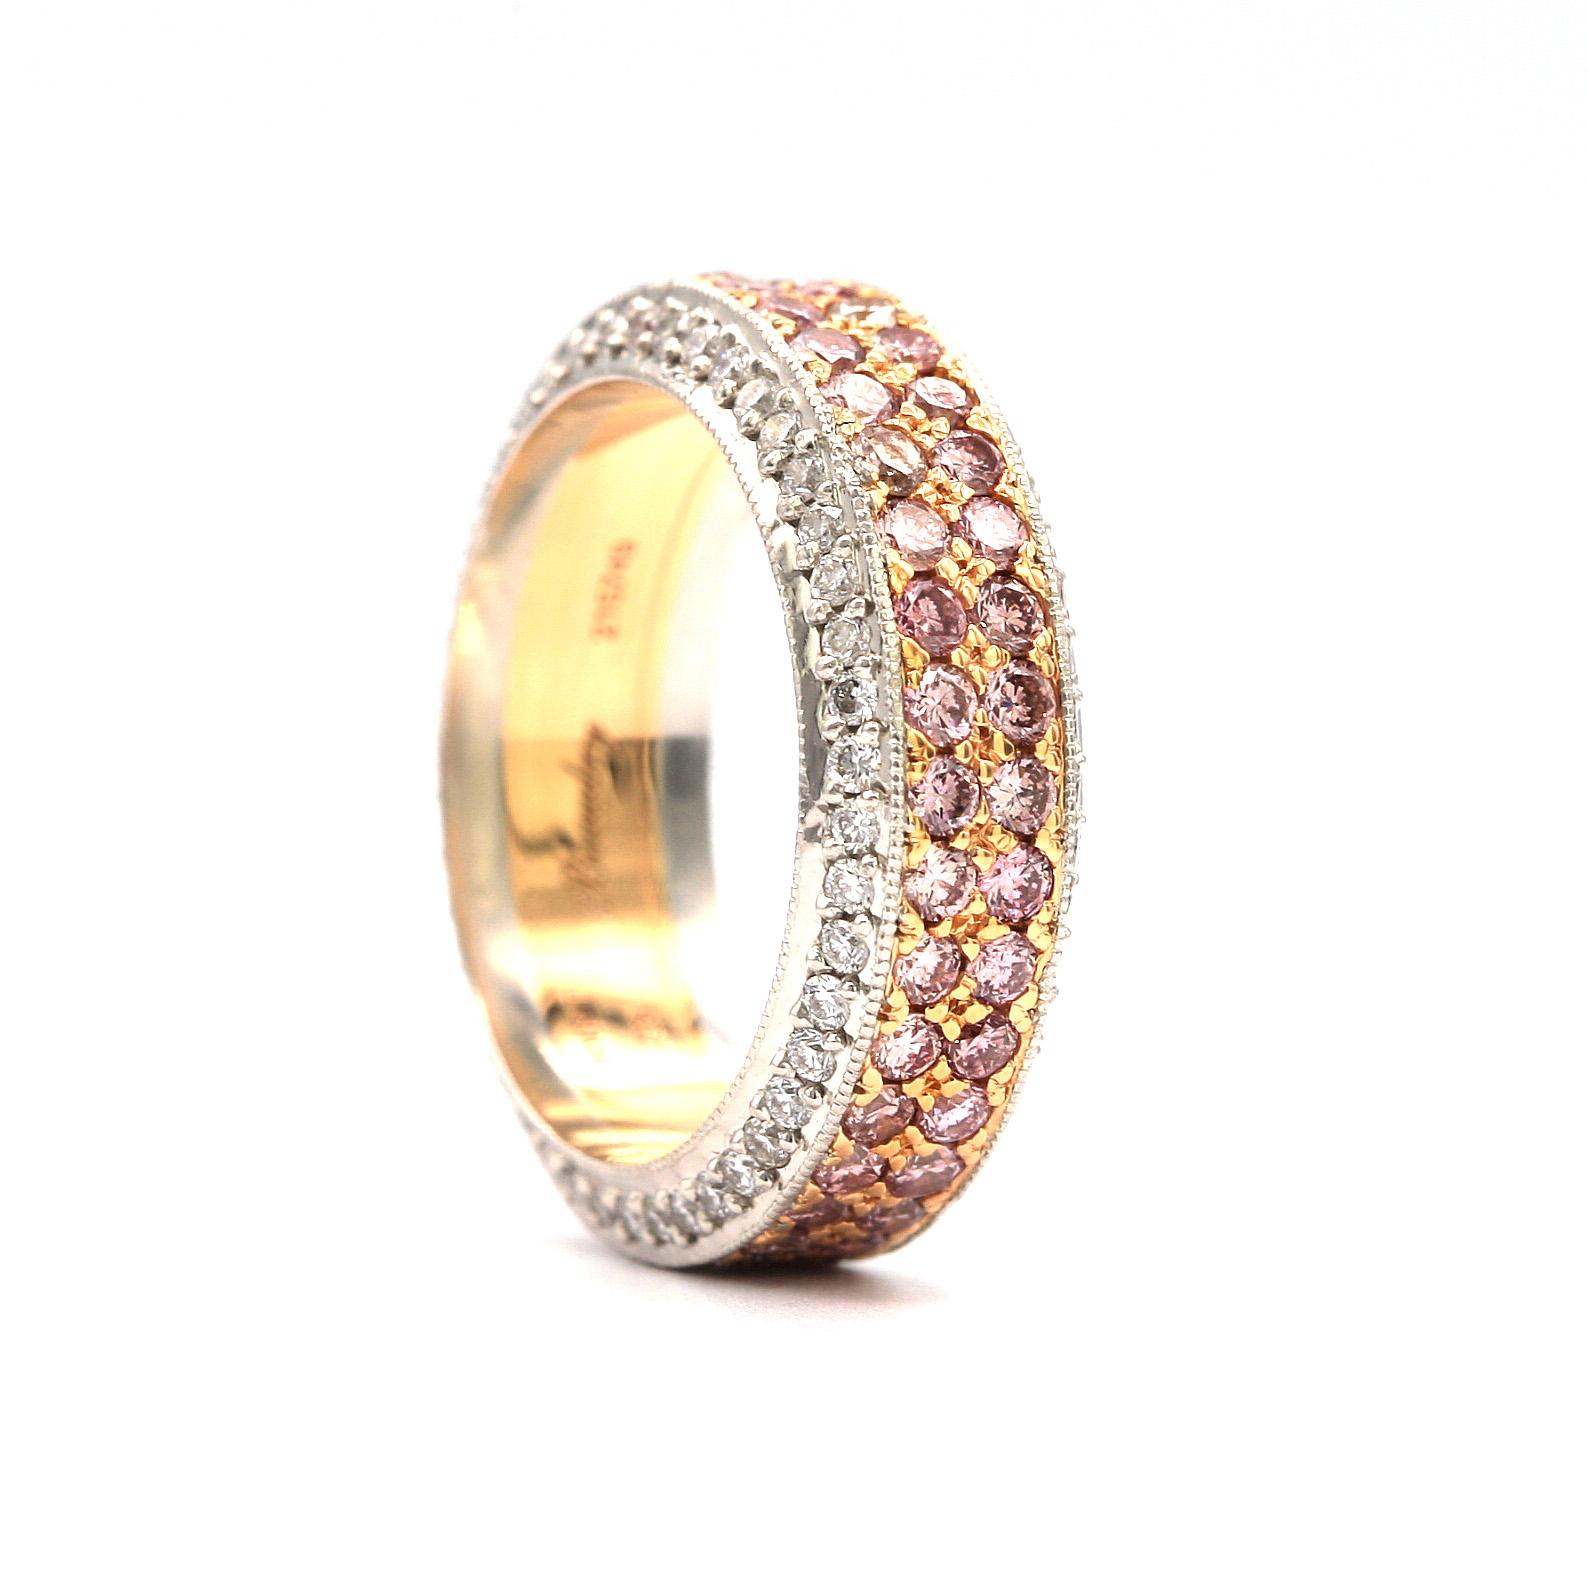 Baguette Cut Beaudry Ring with 1.80 Carat Fancy Pink Diamonds and 0.82 Carat White Diamonds